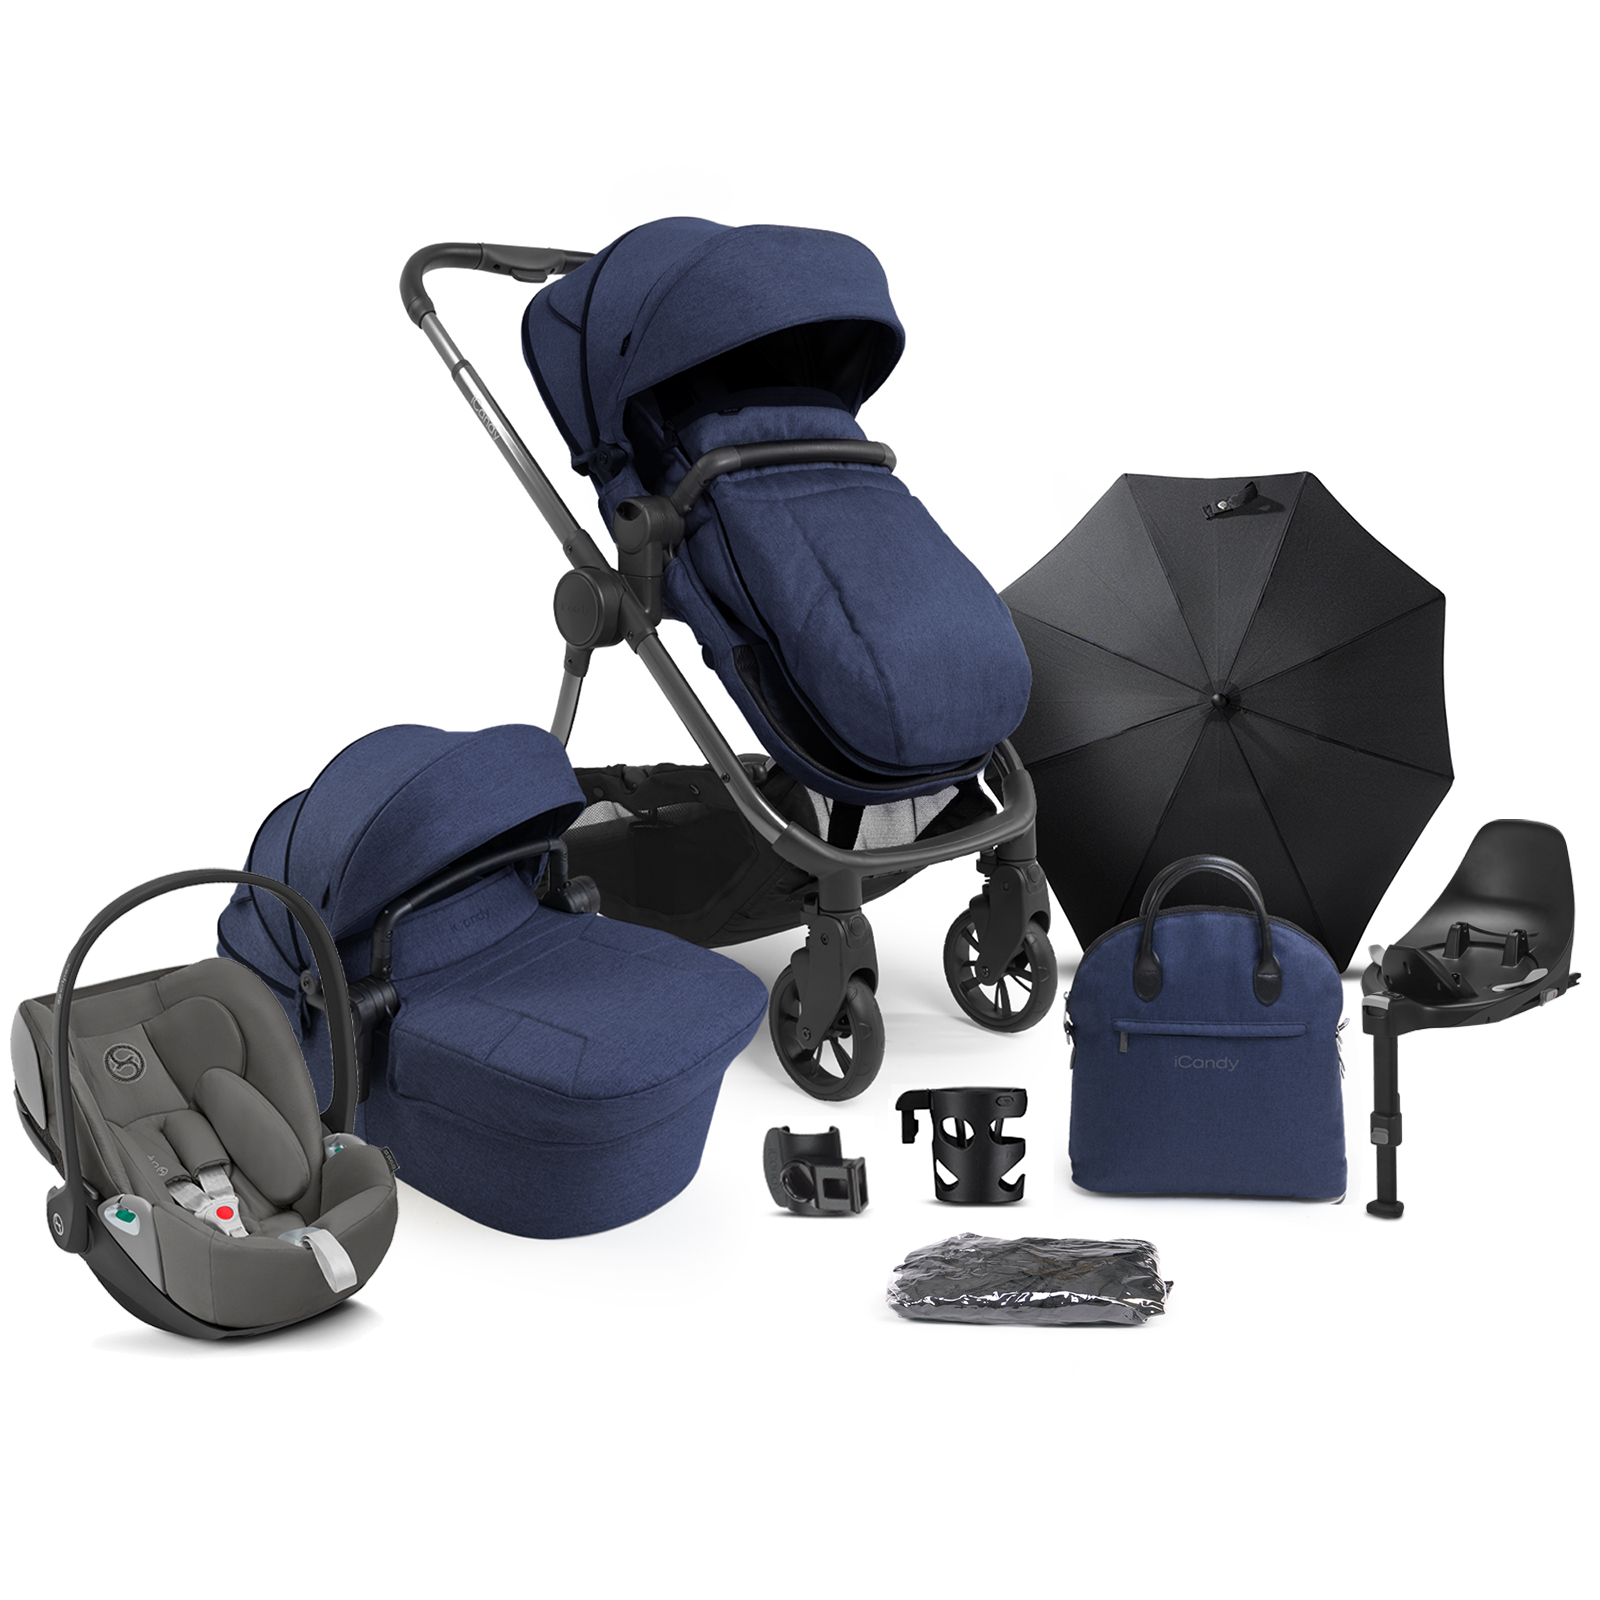 iCandy Lime Lifestyle (Cloud Z2) Travel System Summer Bundle with ISOFIX Base - Navy